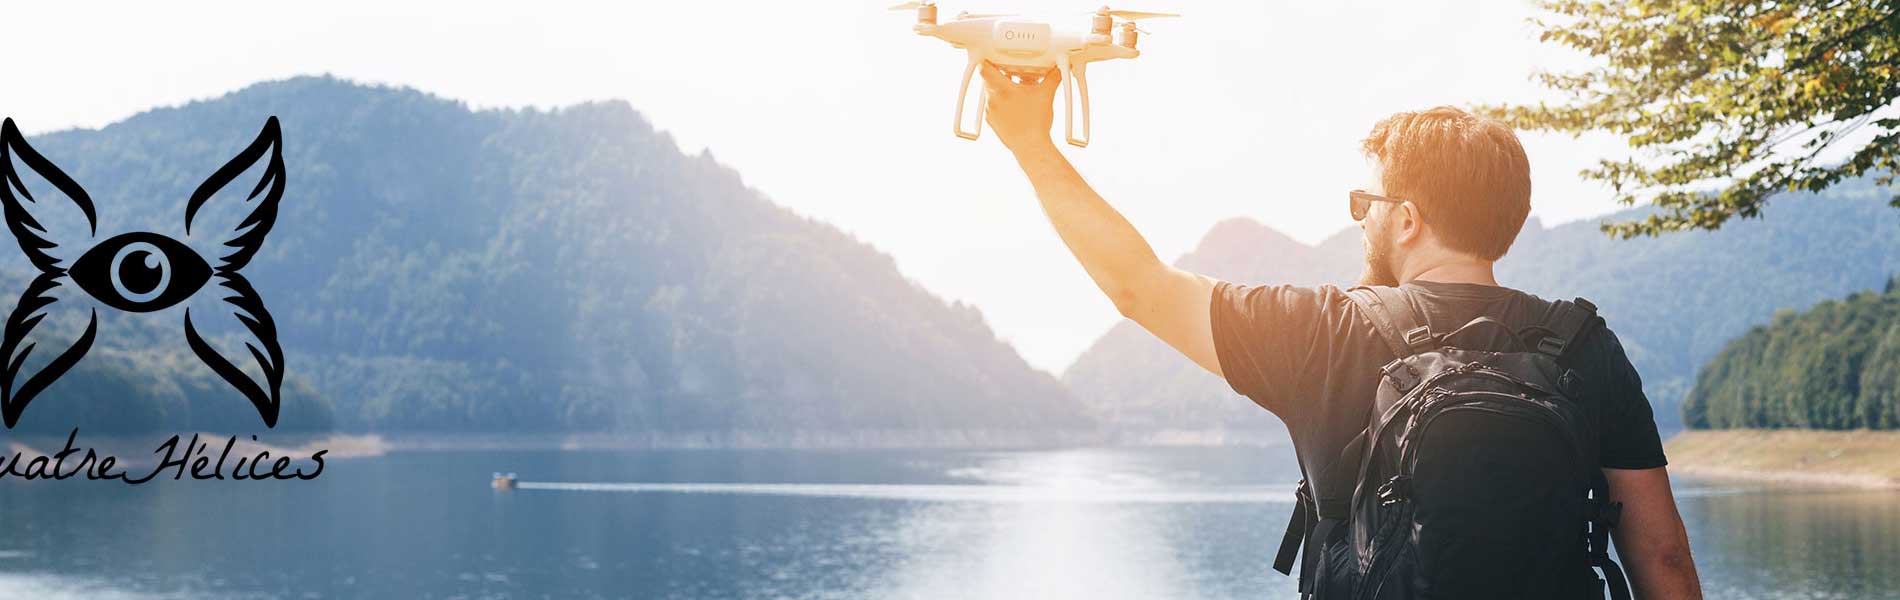 Video drone immobilier